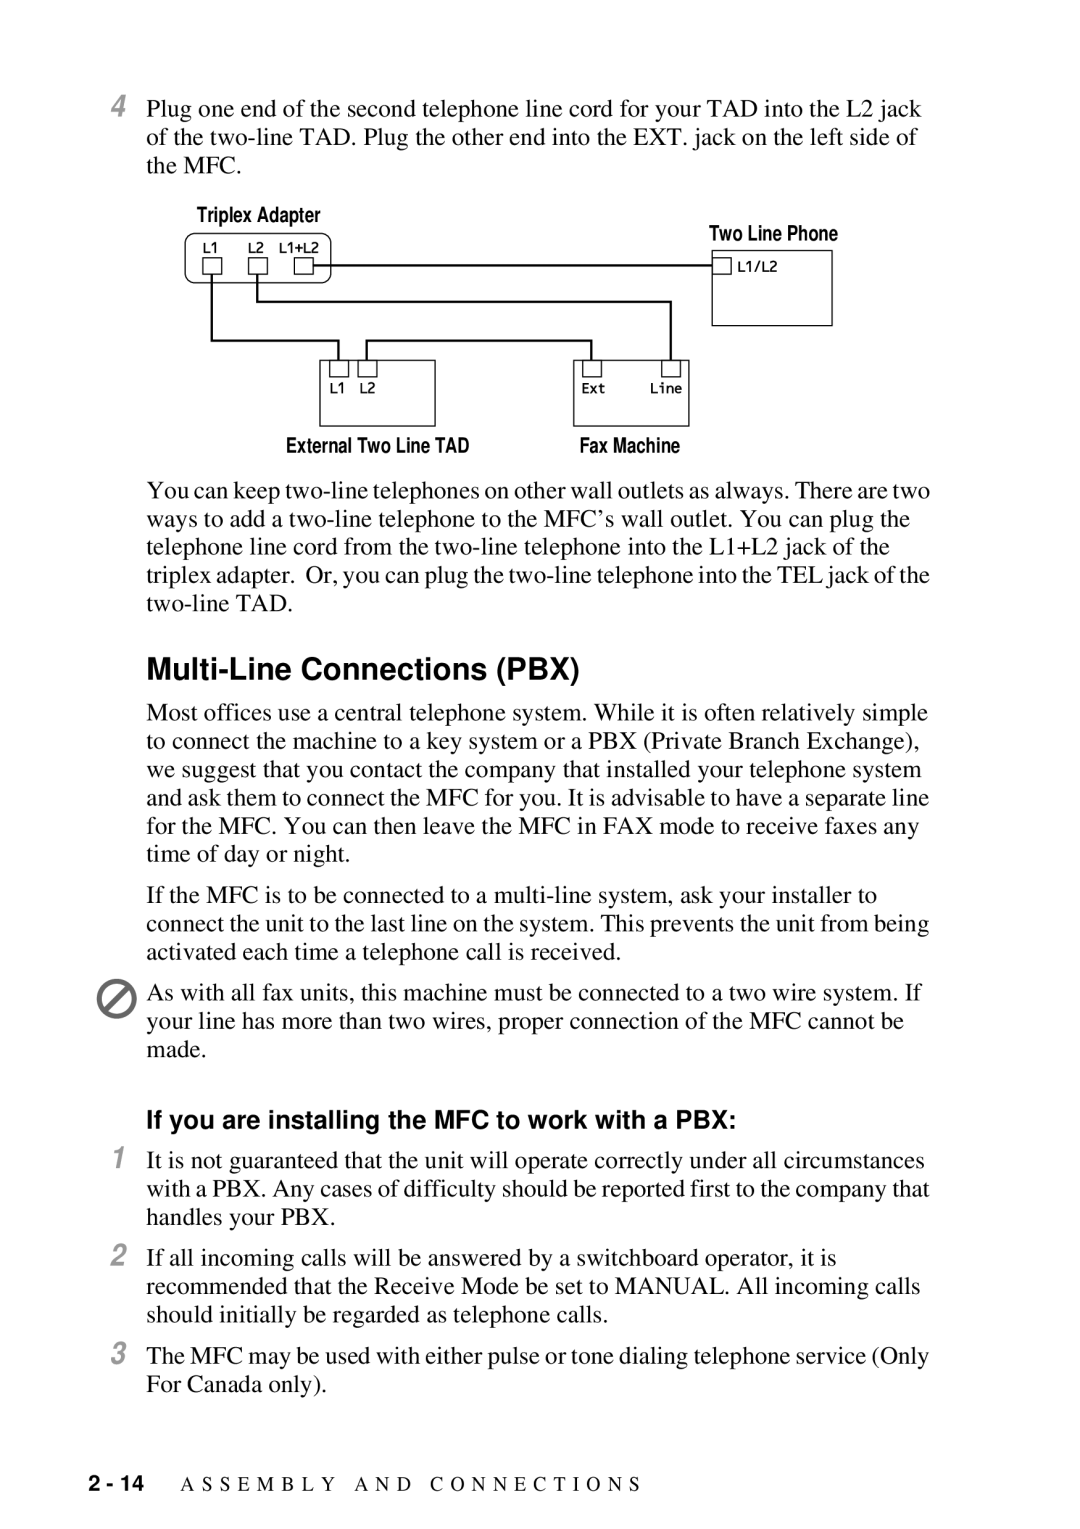 Brother MFC-7300C manual Multi-Line Connections PBX, If you are installing the MFC to work with a PBX 